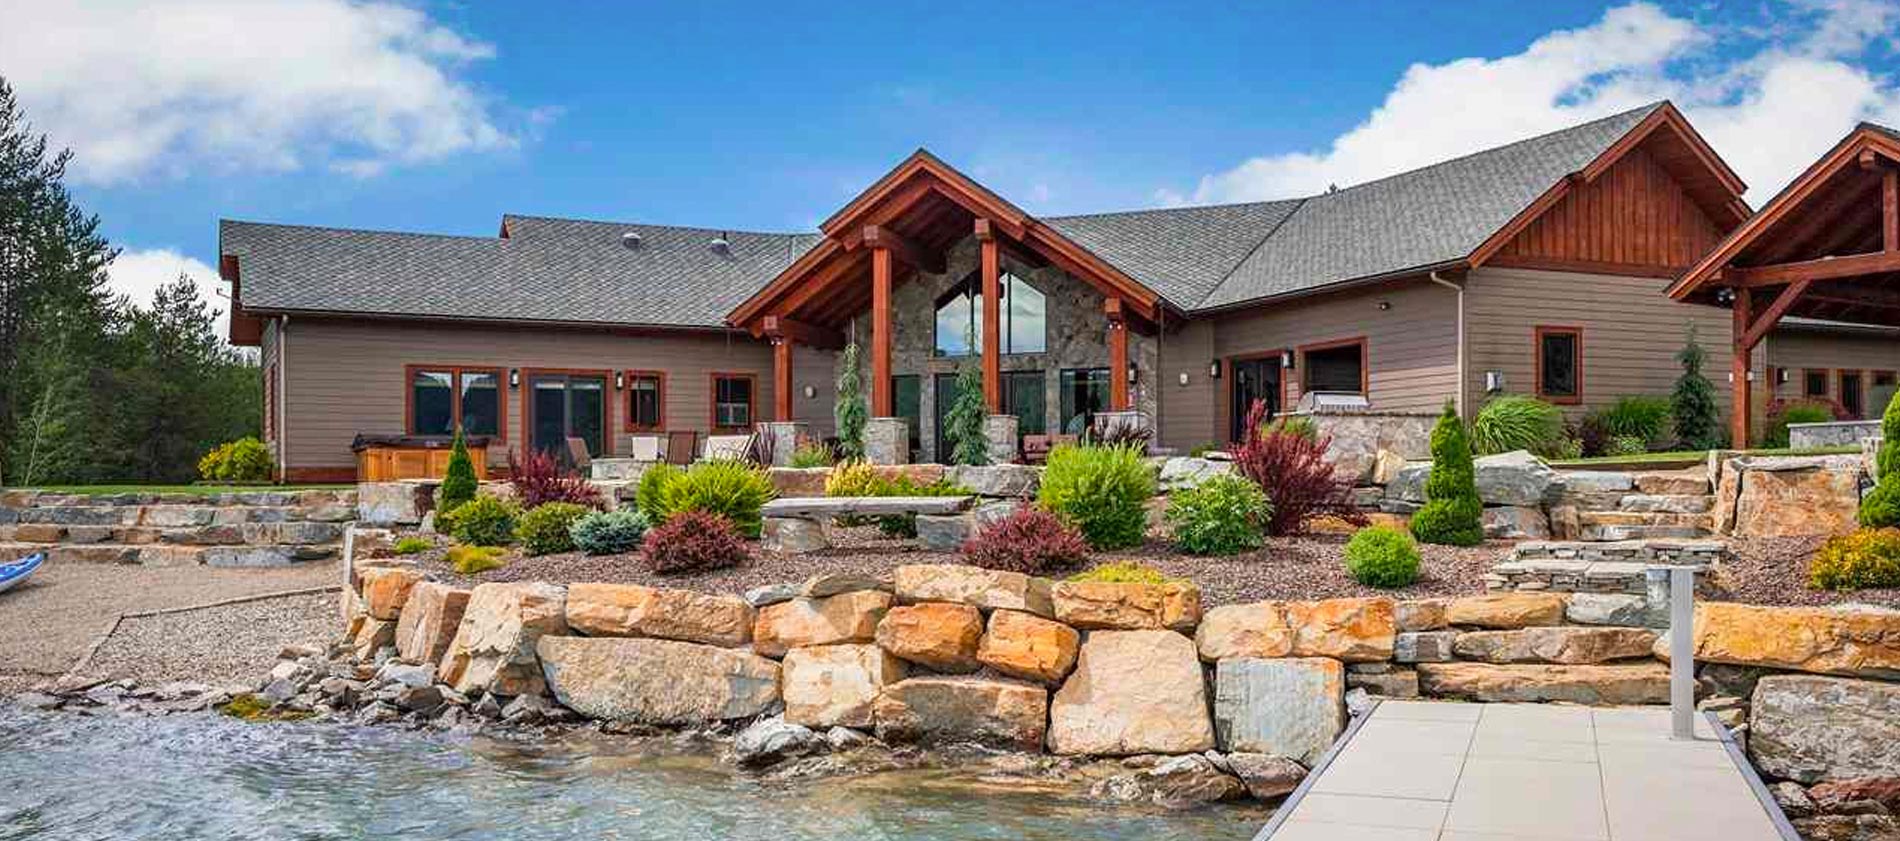 FLATWATER LANDING – Waterfront and Woodlands on the Pend Oreille River